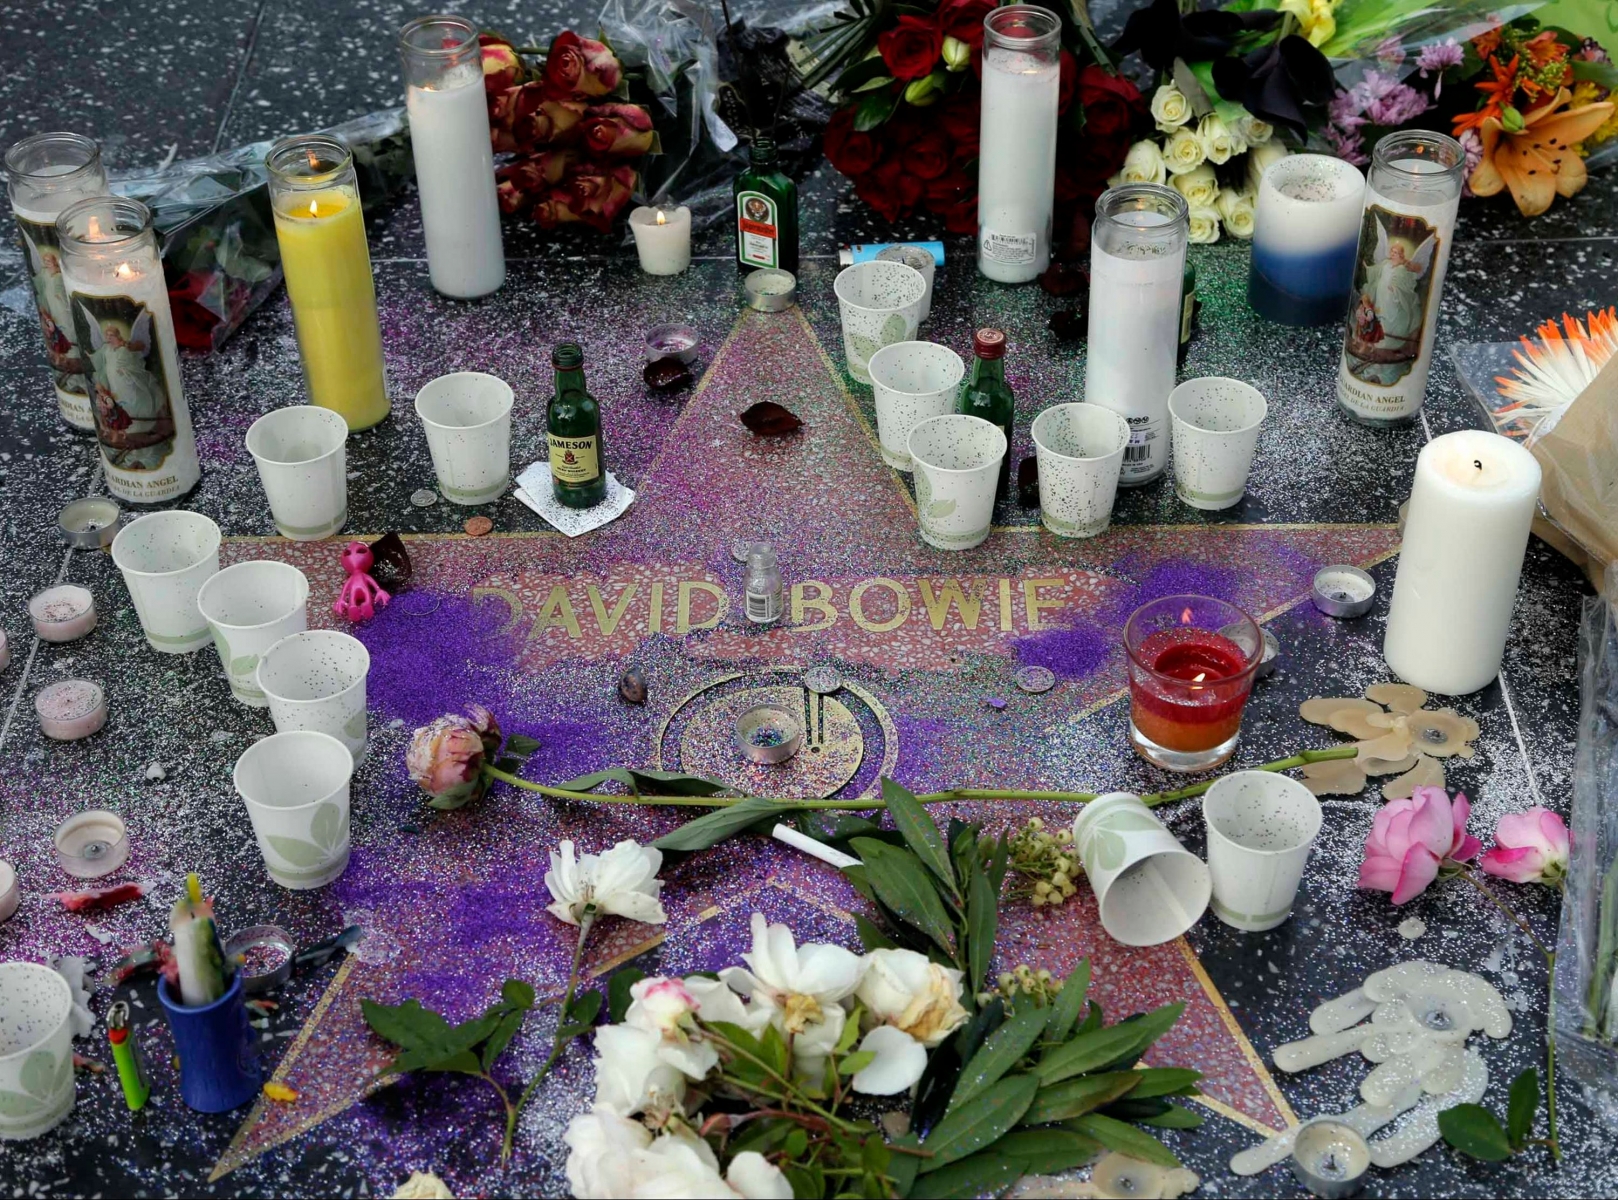 A makeshift memorial surrounds David Bowie's star on the Hollywood Walk of Fame in Los Angeles, Monday, Jan. 11, 2016. Bowie, the other-worldly musician who broke pop and rock boundaries with his creative musicianship, nonconformity, striking visuals and a genre-spanning persona he christened Ziggy Stardust, died of cancer Sunday. He was 69 and had just released a new album. (AP Photo/Nick Ut) Obit David Bowie